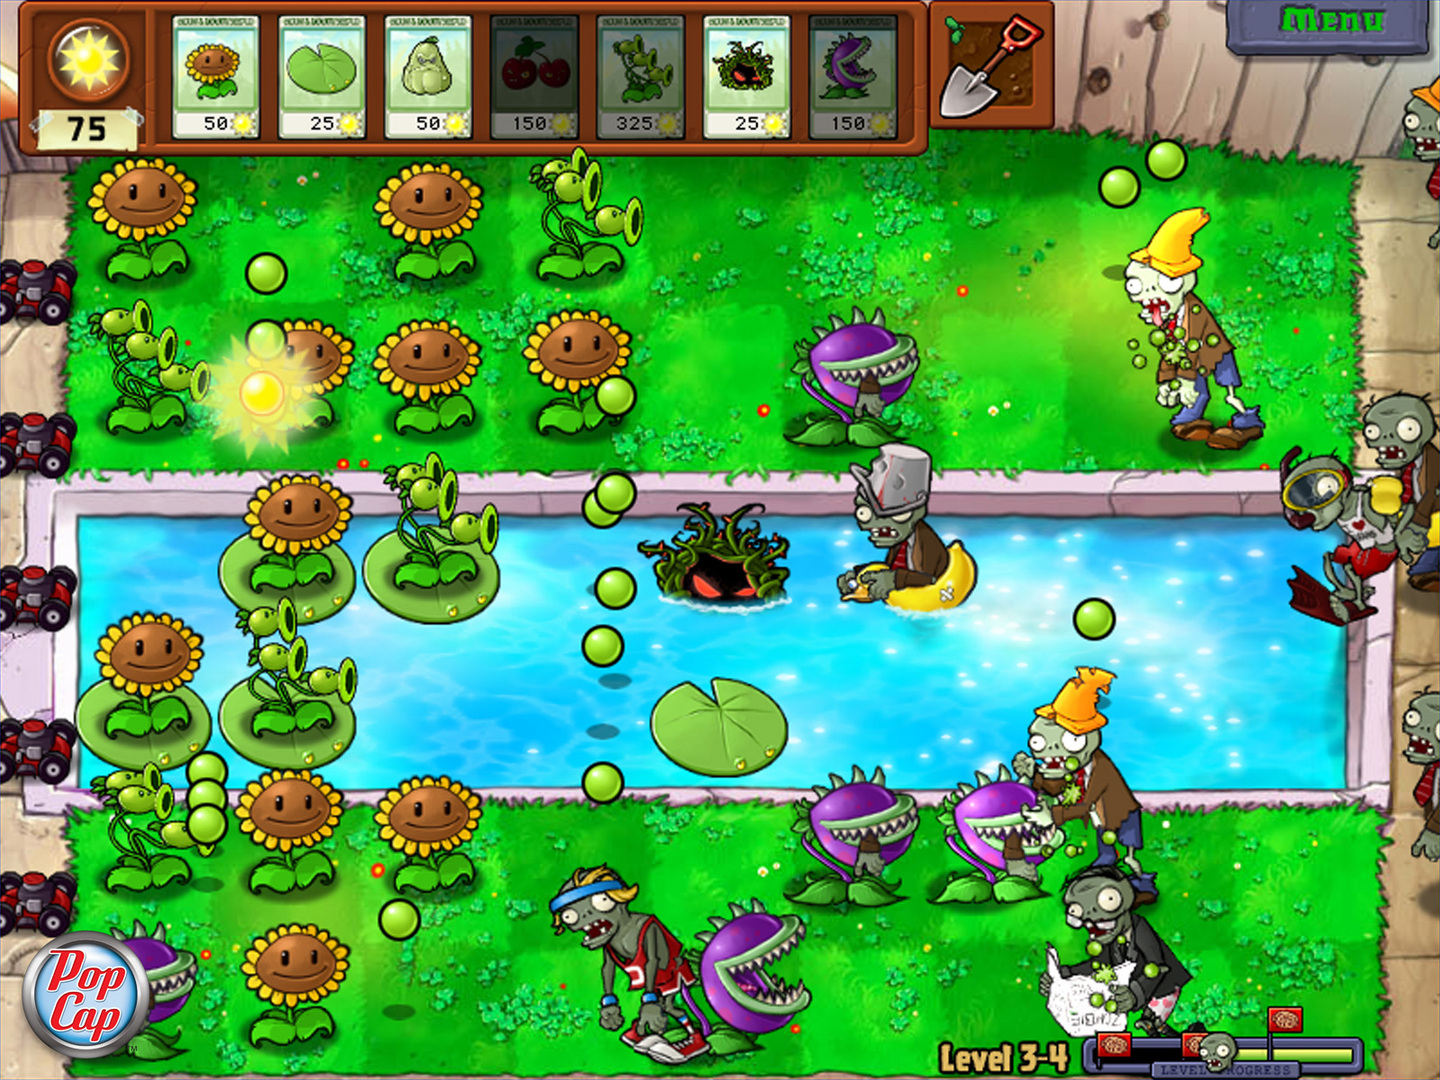 Plants Vs. Zombies Goty Edition On Steam